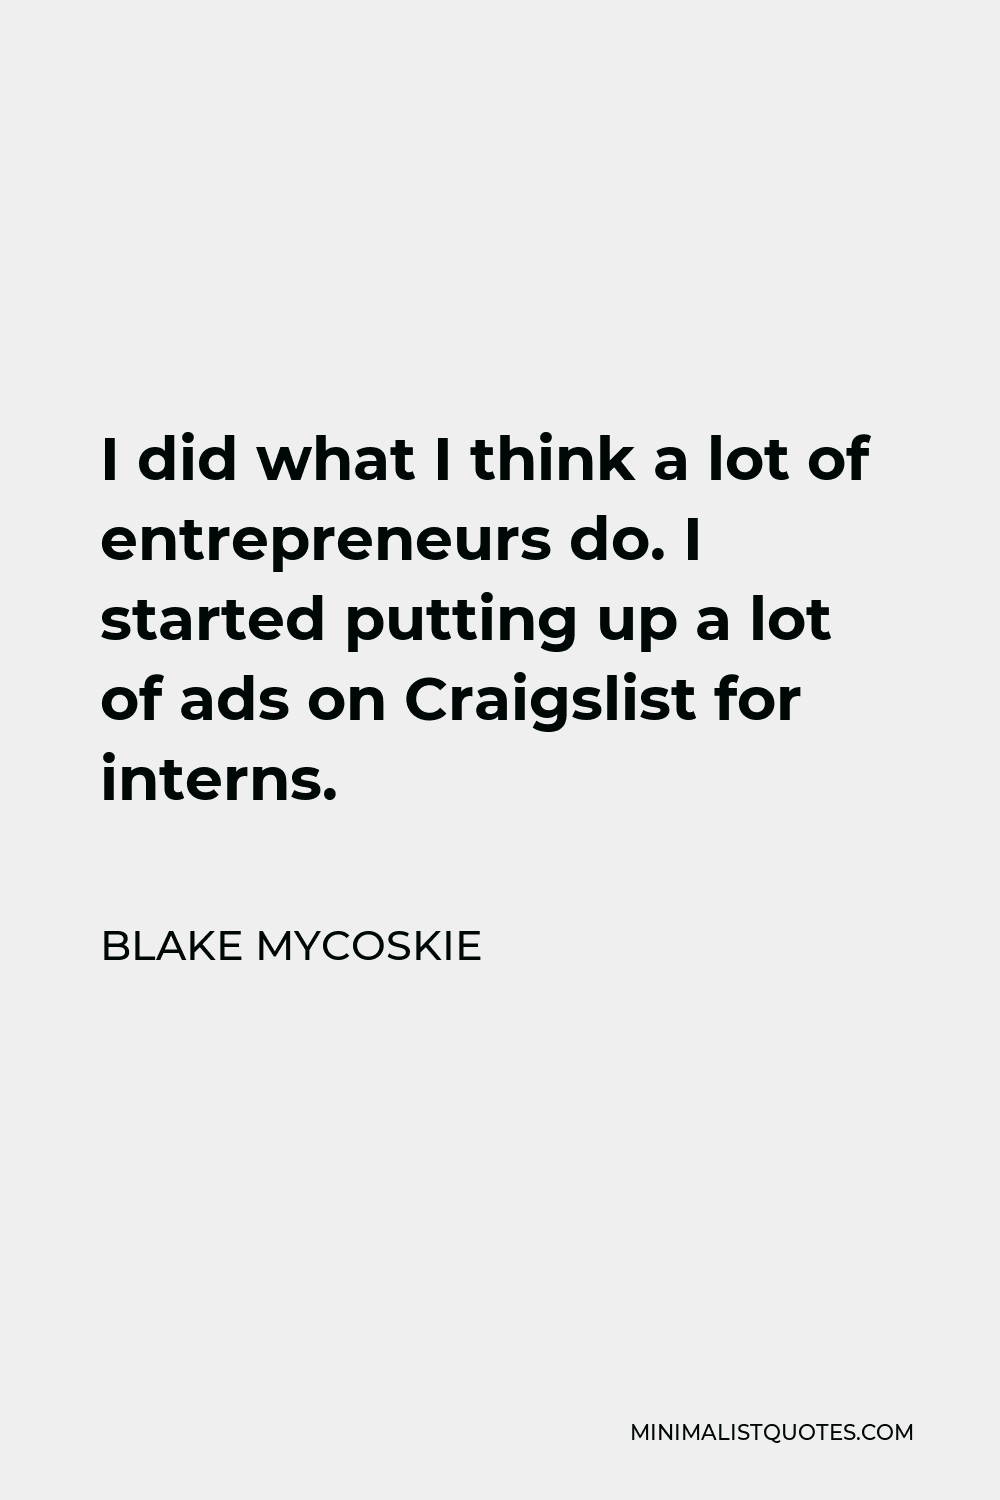 Blake Mycoskie Quote - I did what I think a lot of entrepreneurs do. I started putting up a lot of ads on Craigslist for interns.